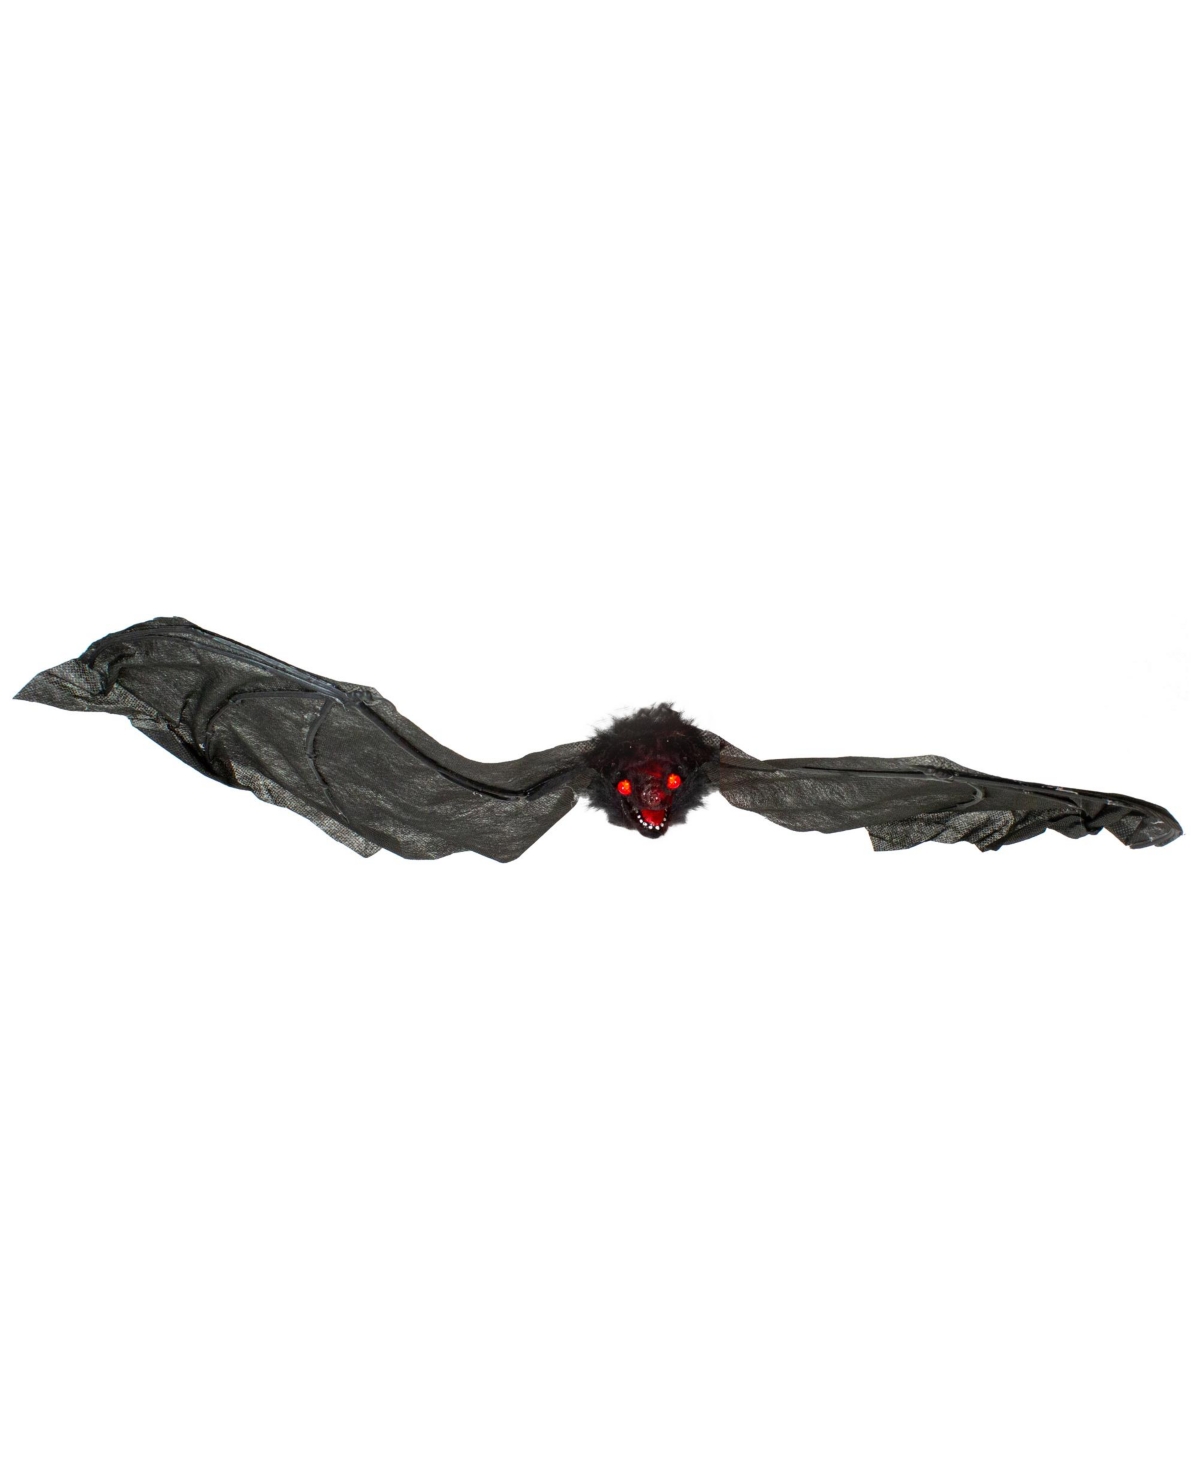 30" Hanging Halloween Bat Decoration with Lighted Red Eyes - Black